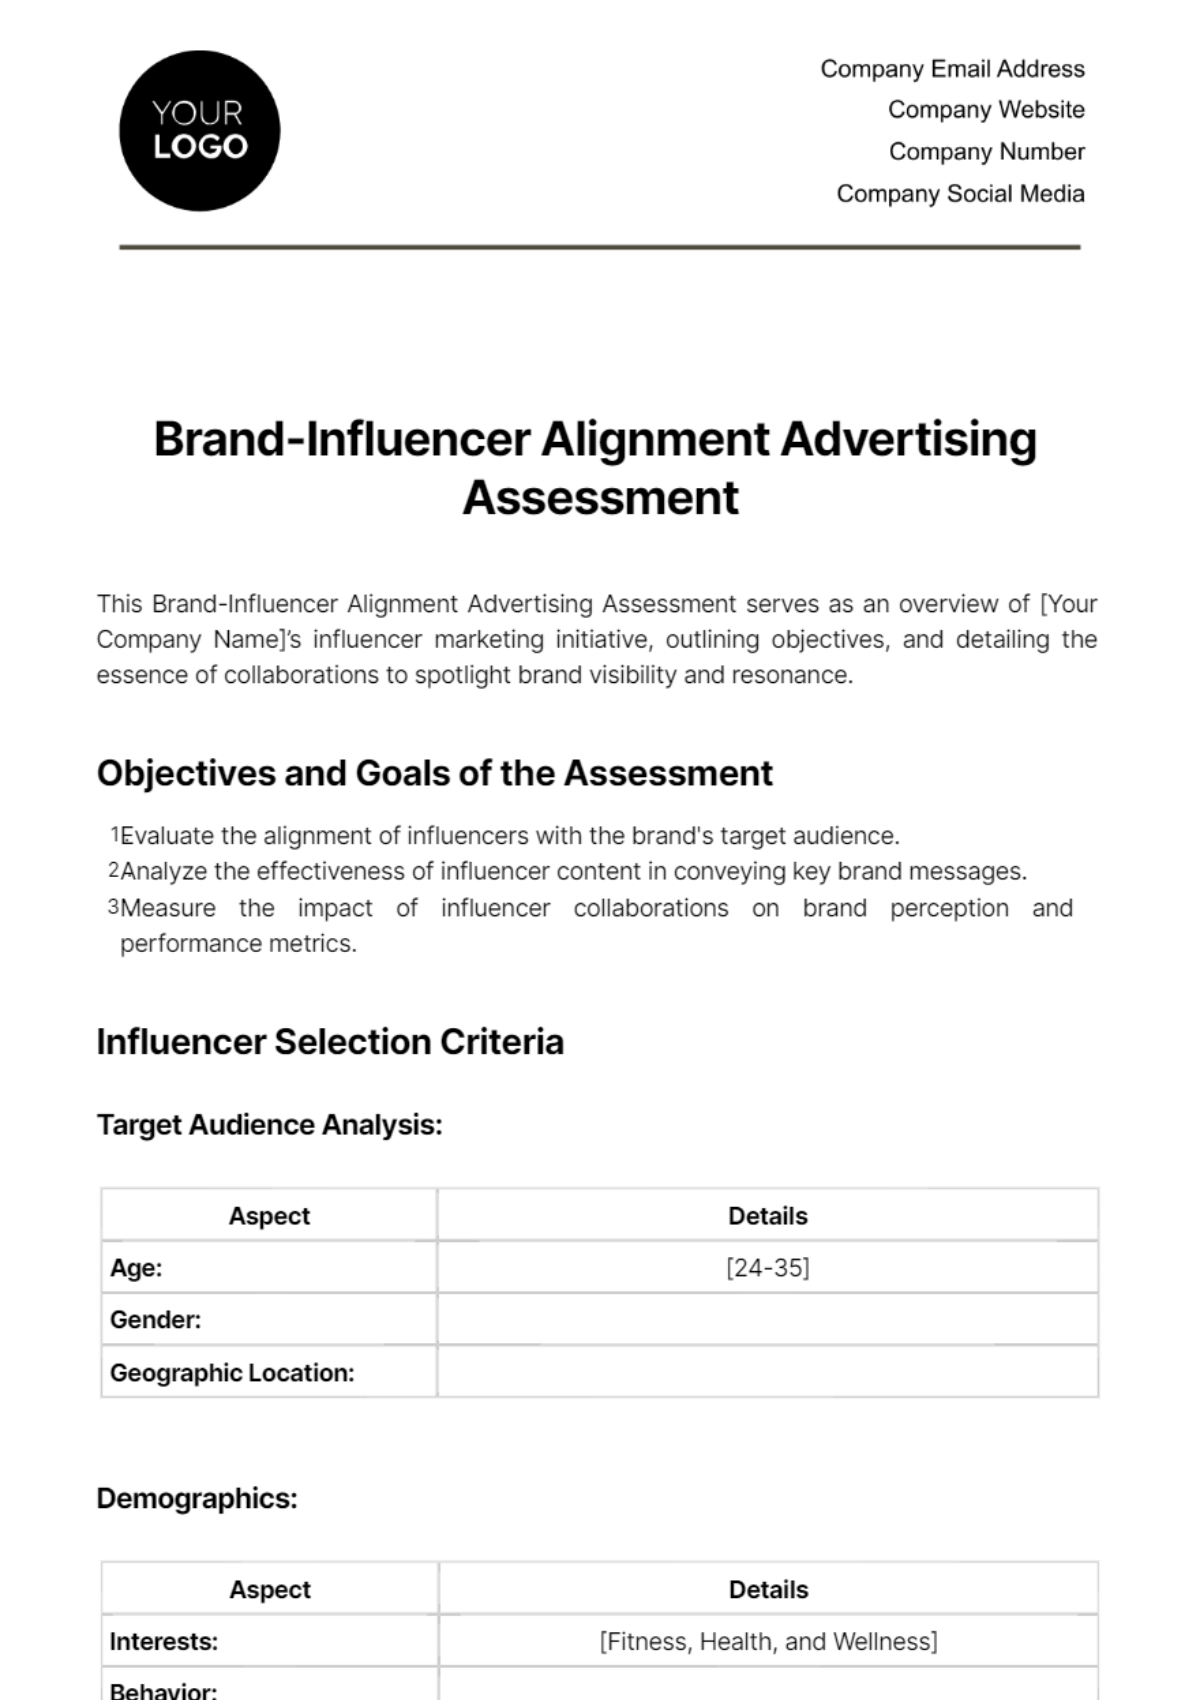 Free Brand-Influencer Alignment Advertising Assessment Template